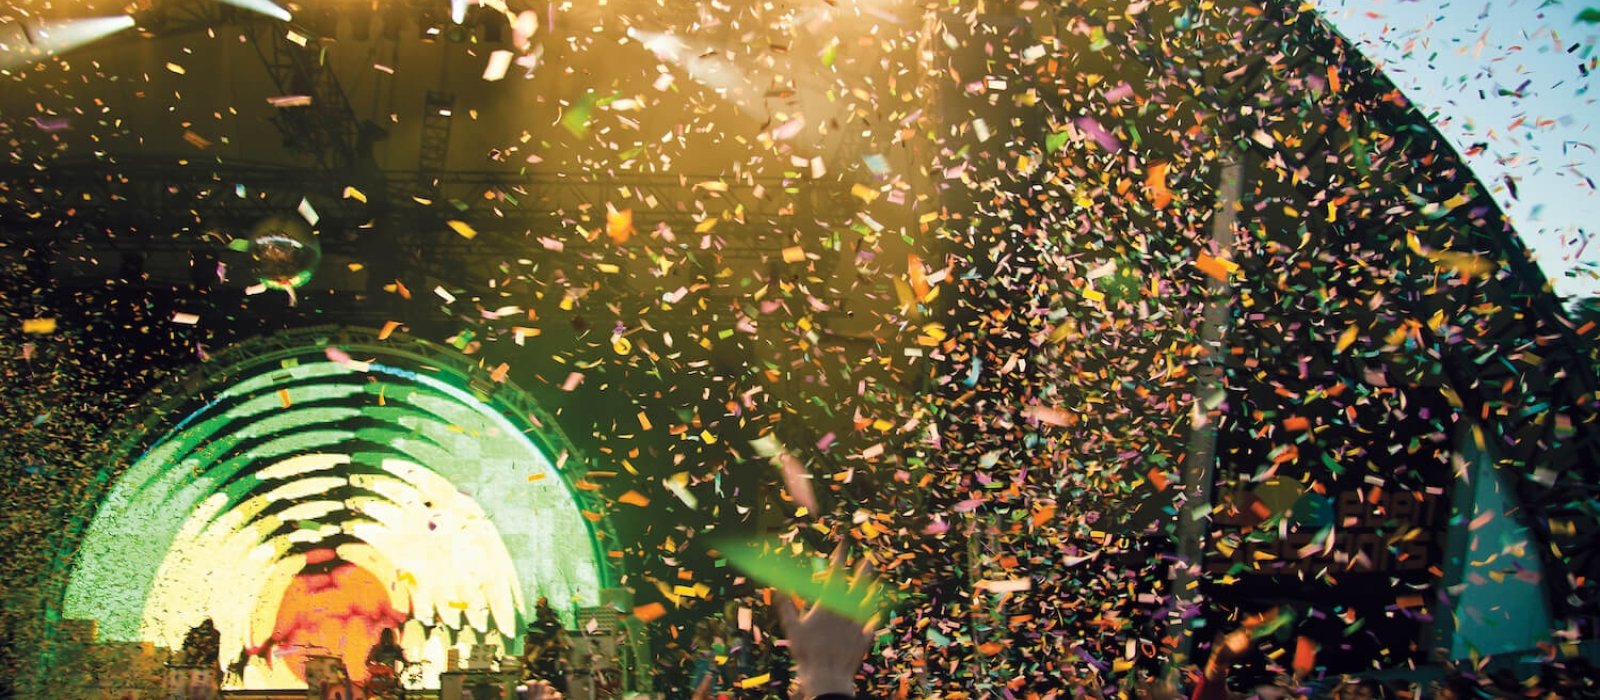 Dome stage at the Eden project, confetti flying through the air at a Flaming Lips gig.